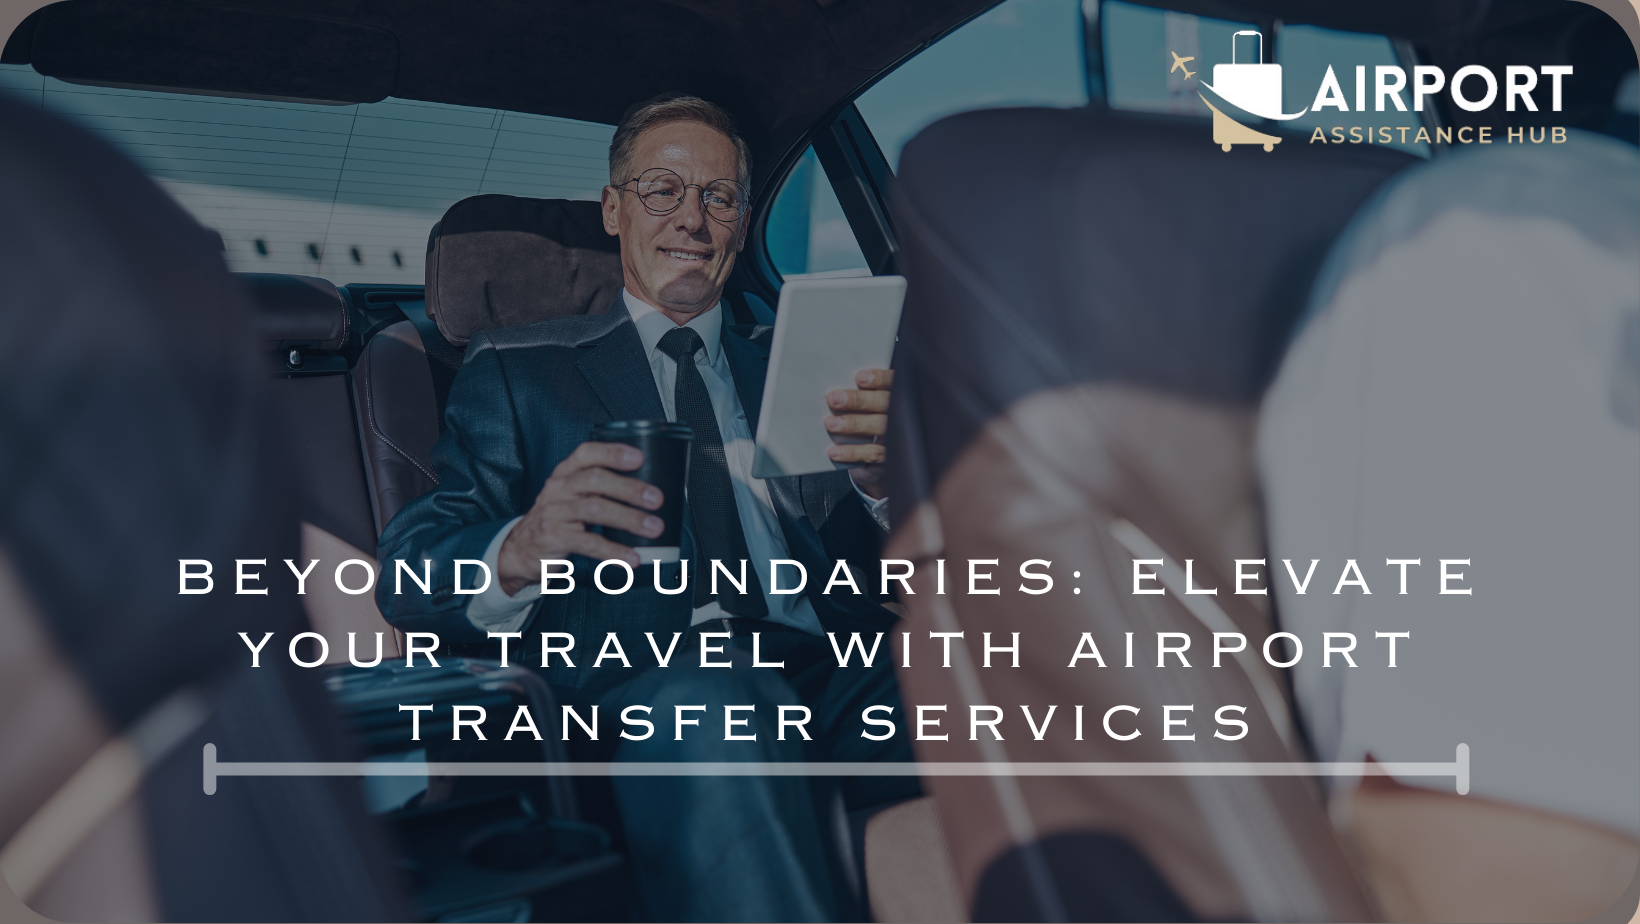 Beyond Boundaries: Elevate Your Travel with Airport Transfer Services